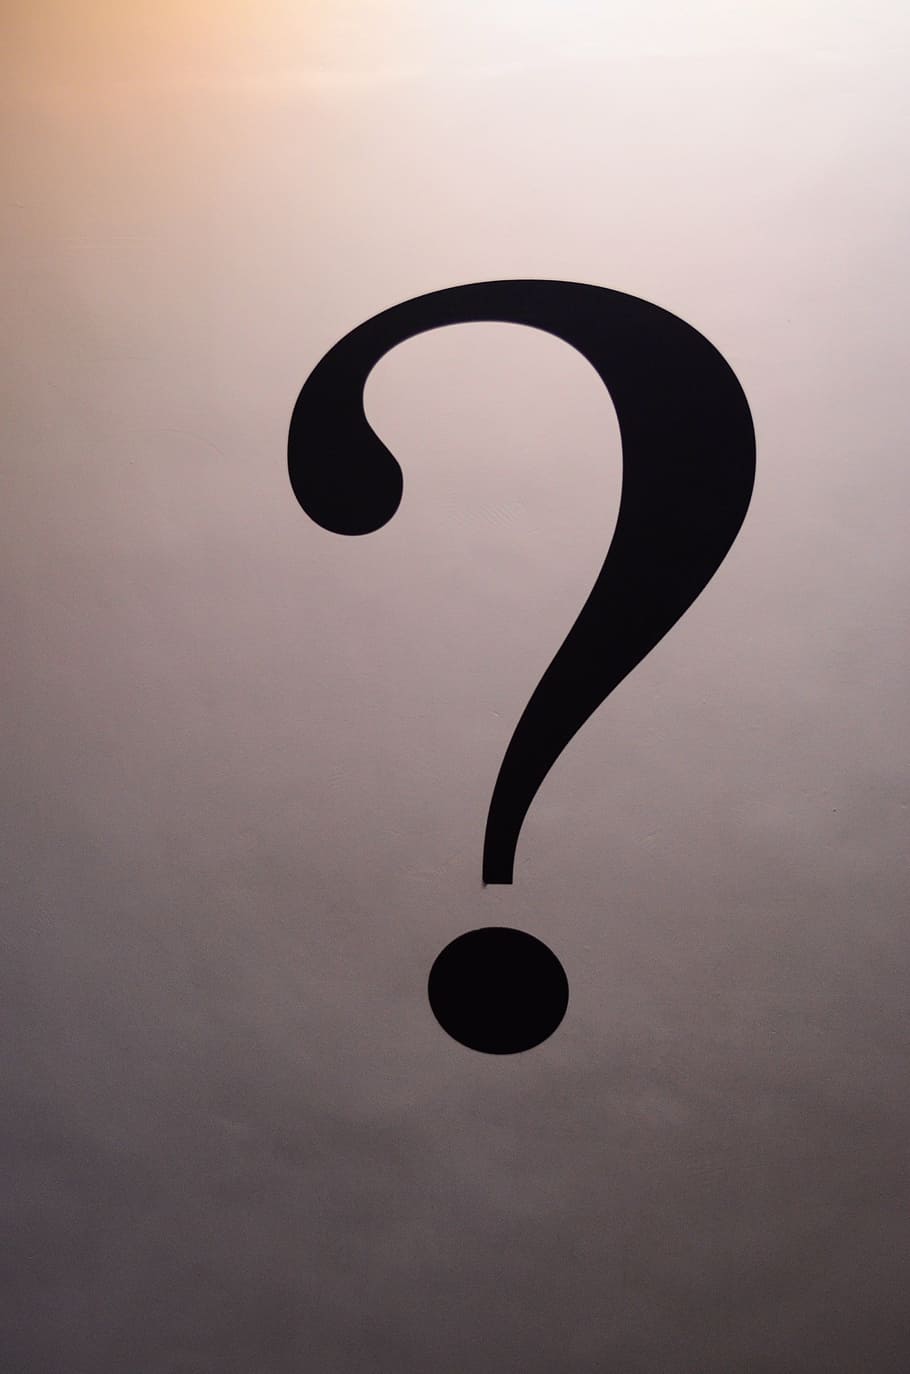 1,000+ Free Question Mark & Question Images - Pixabay